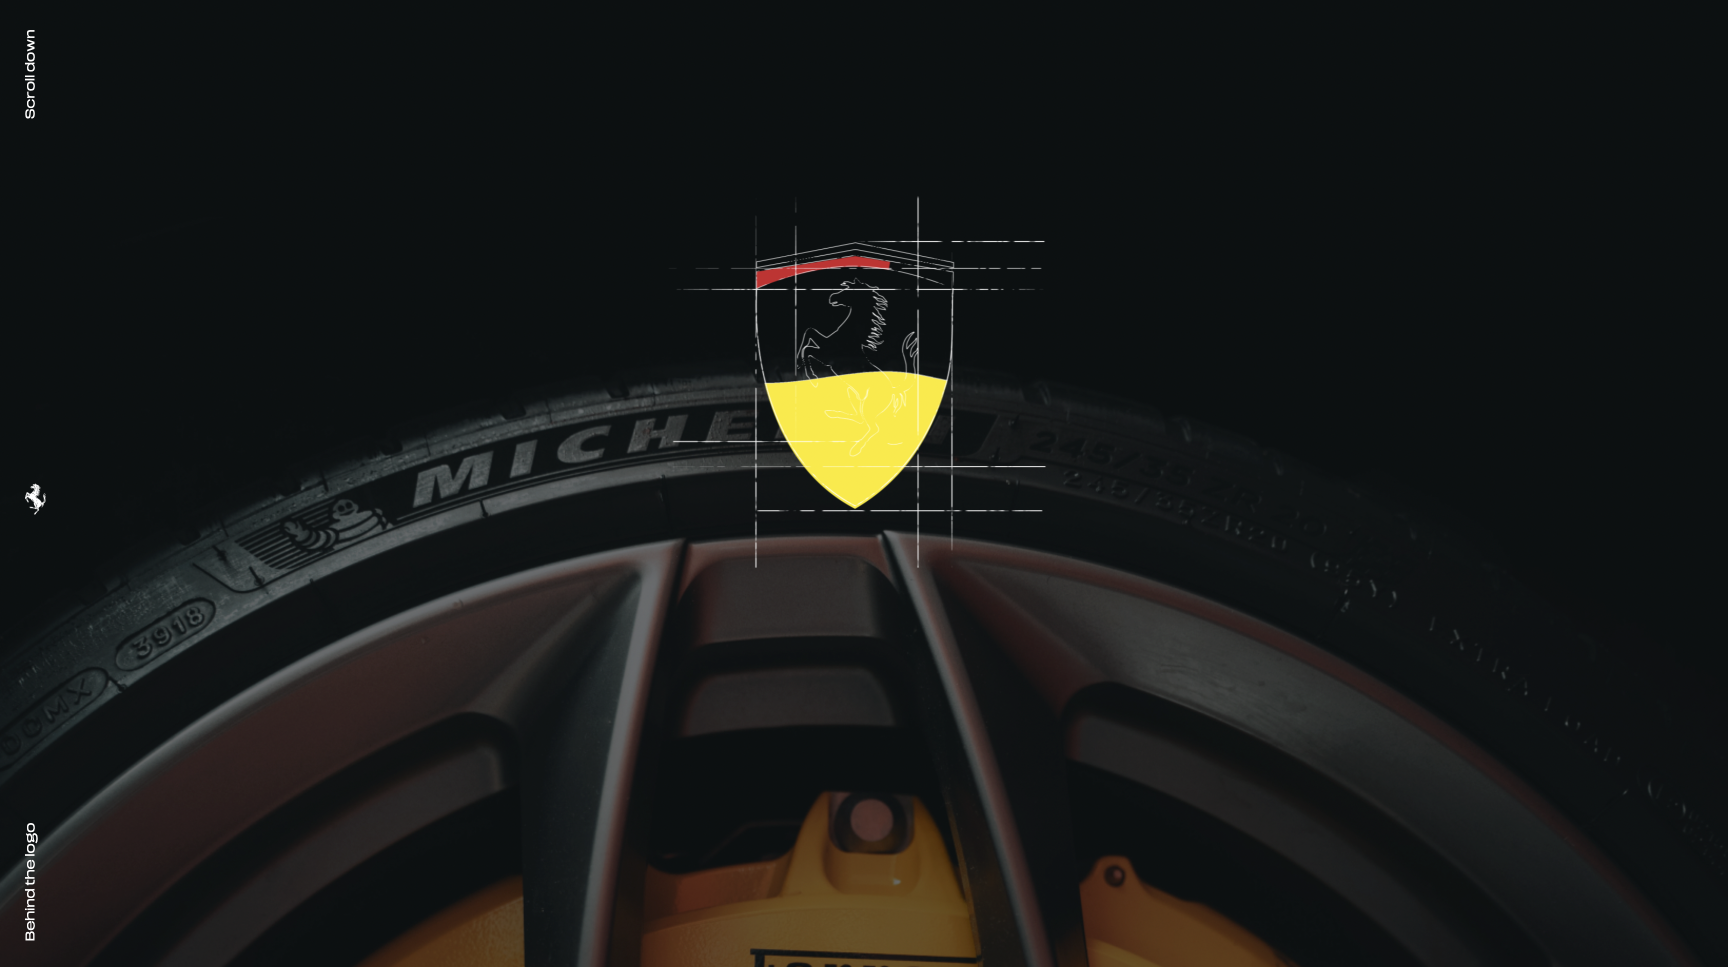 A walkthrough of the live website. Thumbnaul sees part of a wheel on a dark backdrop with sketched up Ferrari logo.